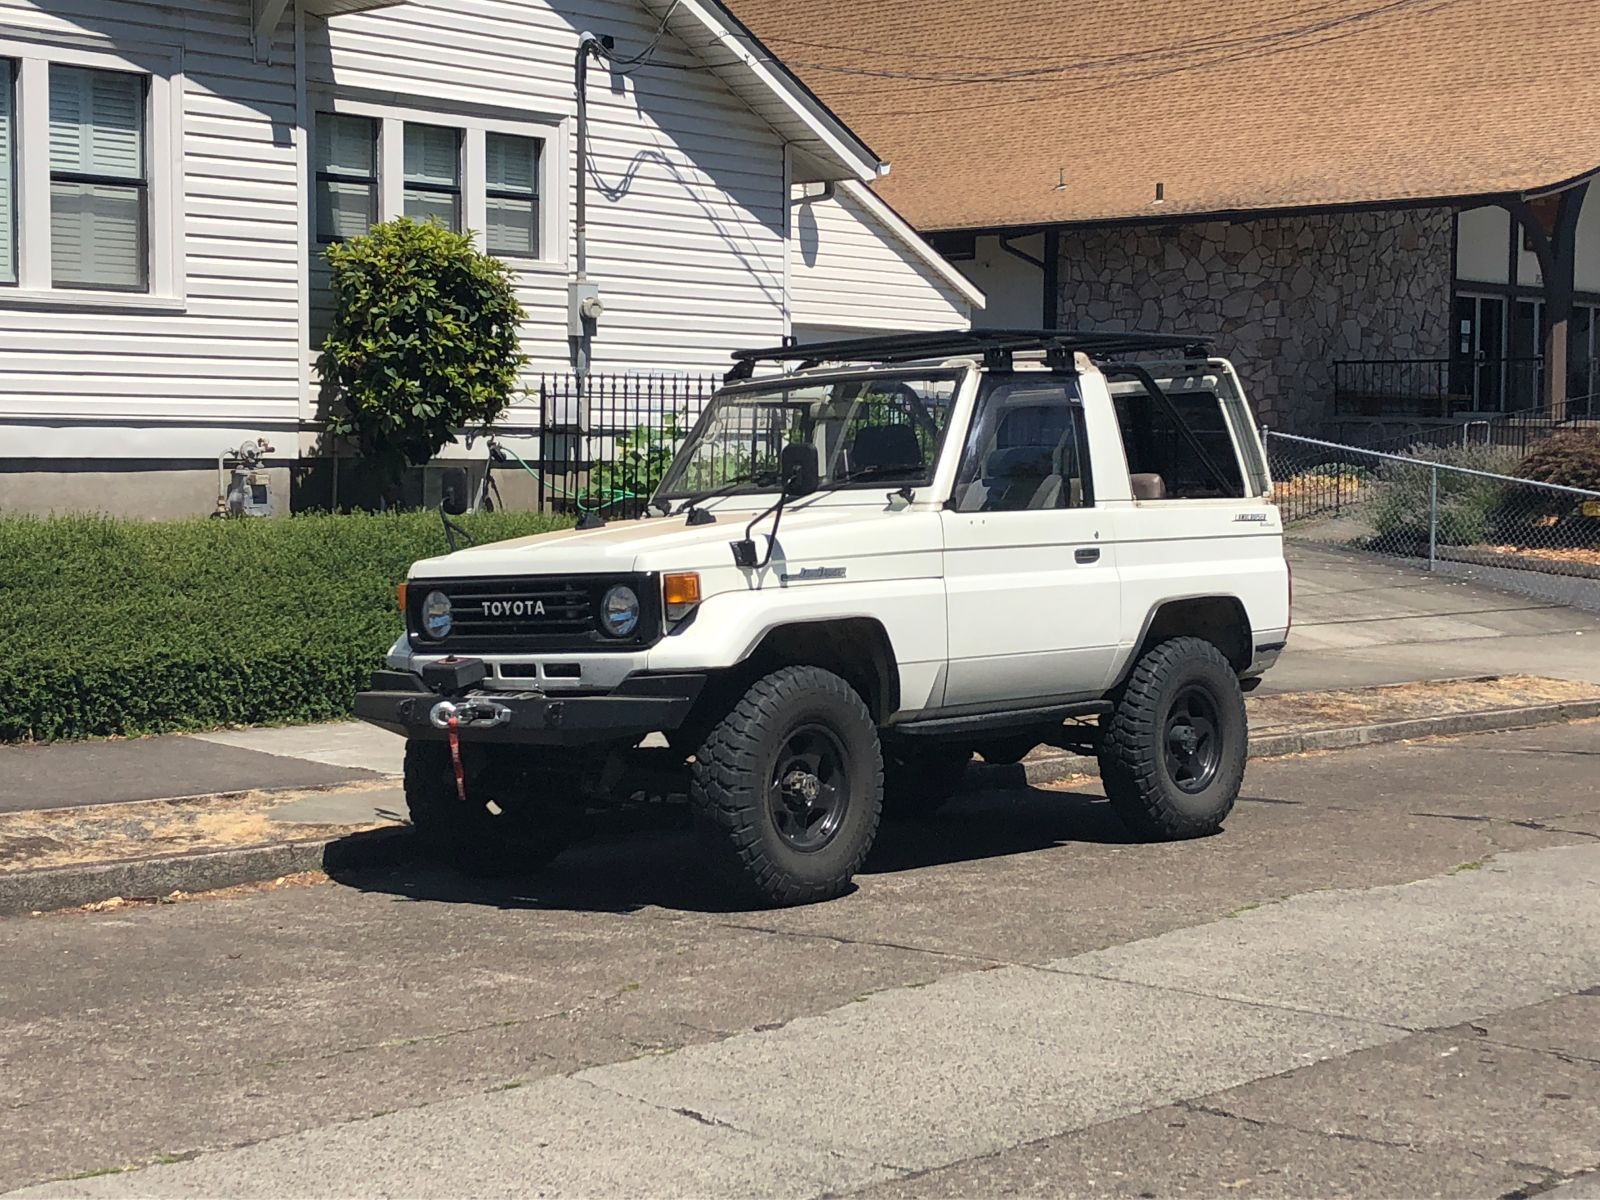 I saw three or four J70 Land Cruisers during my visit, as well as countless 80s, 100s, and 200s.